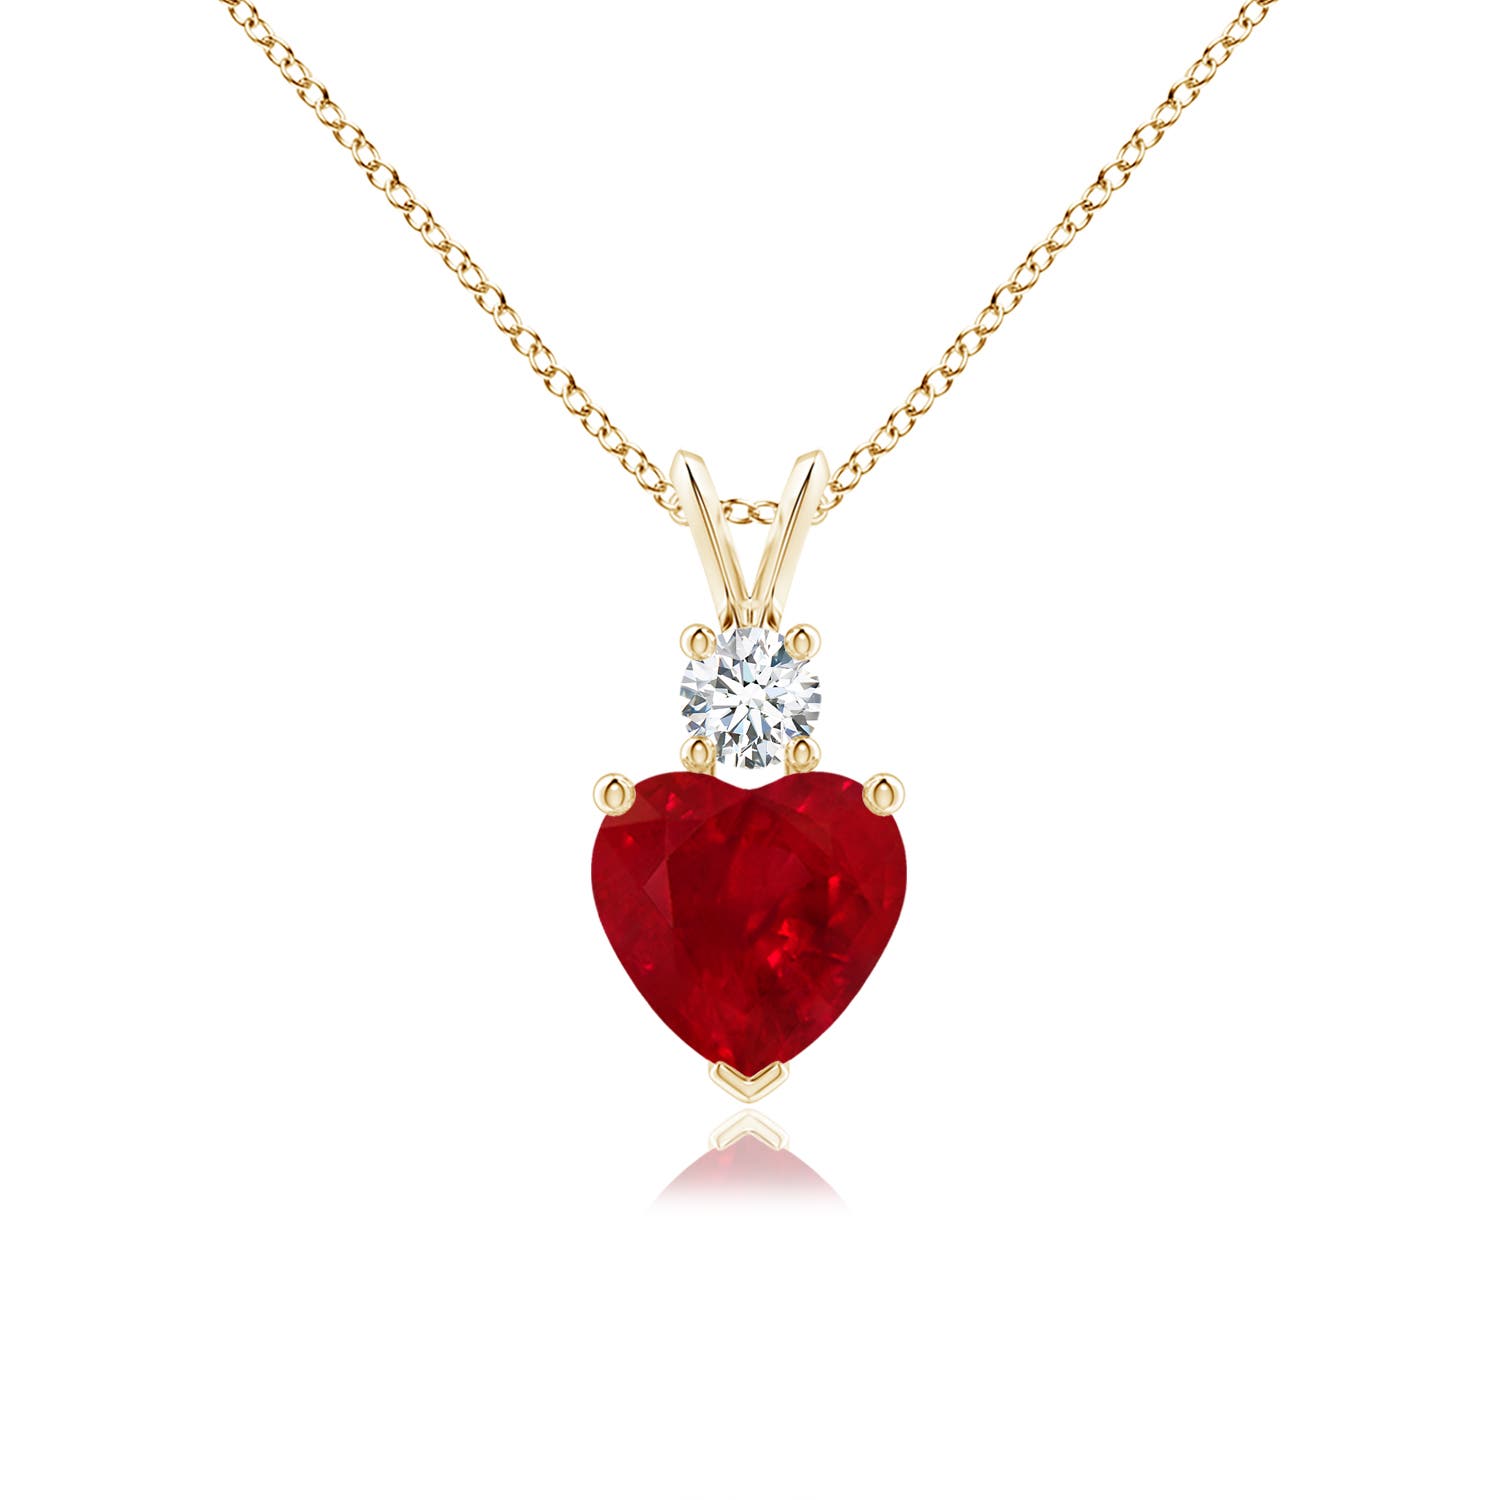 AAA - Ruby / 1.8 CT / 14 KT Yellow Gold